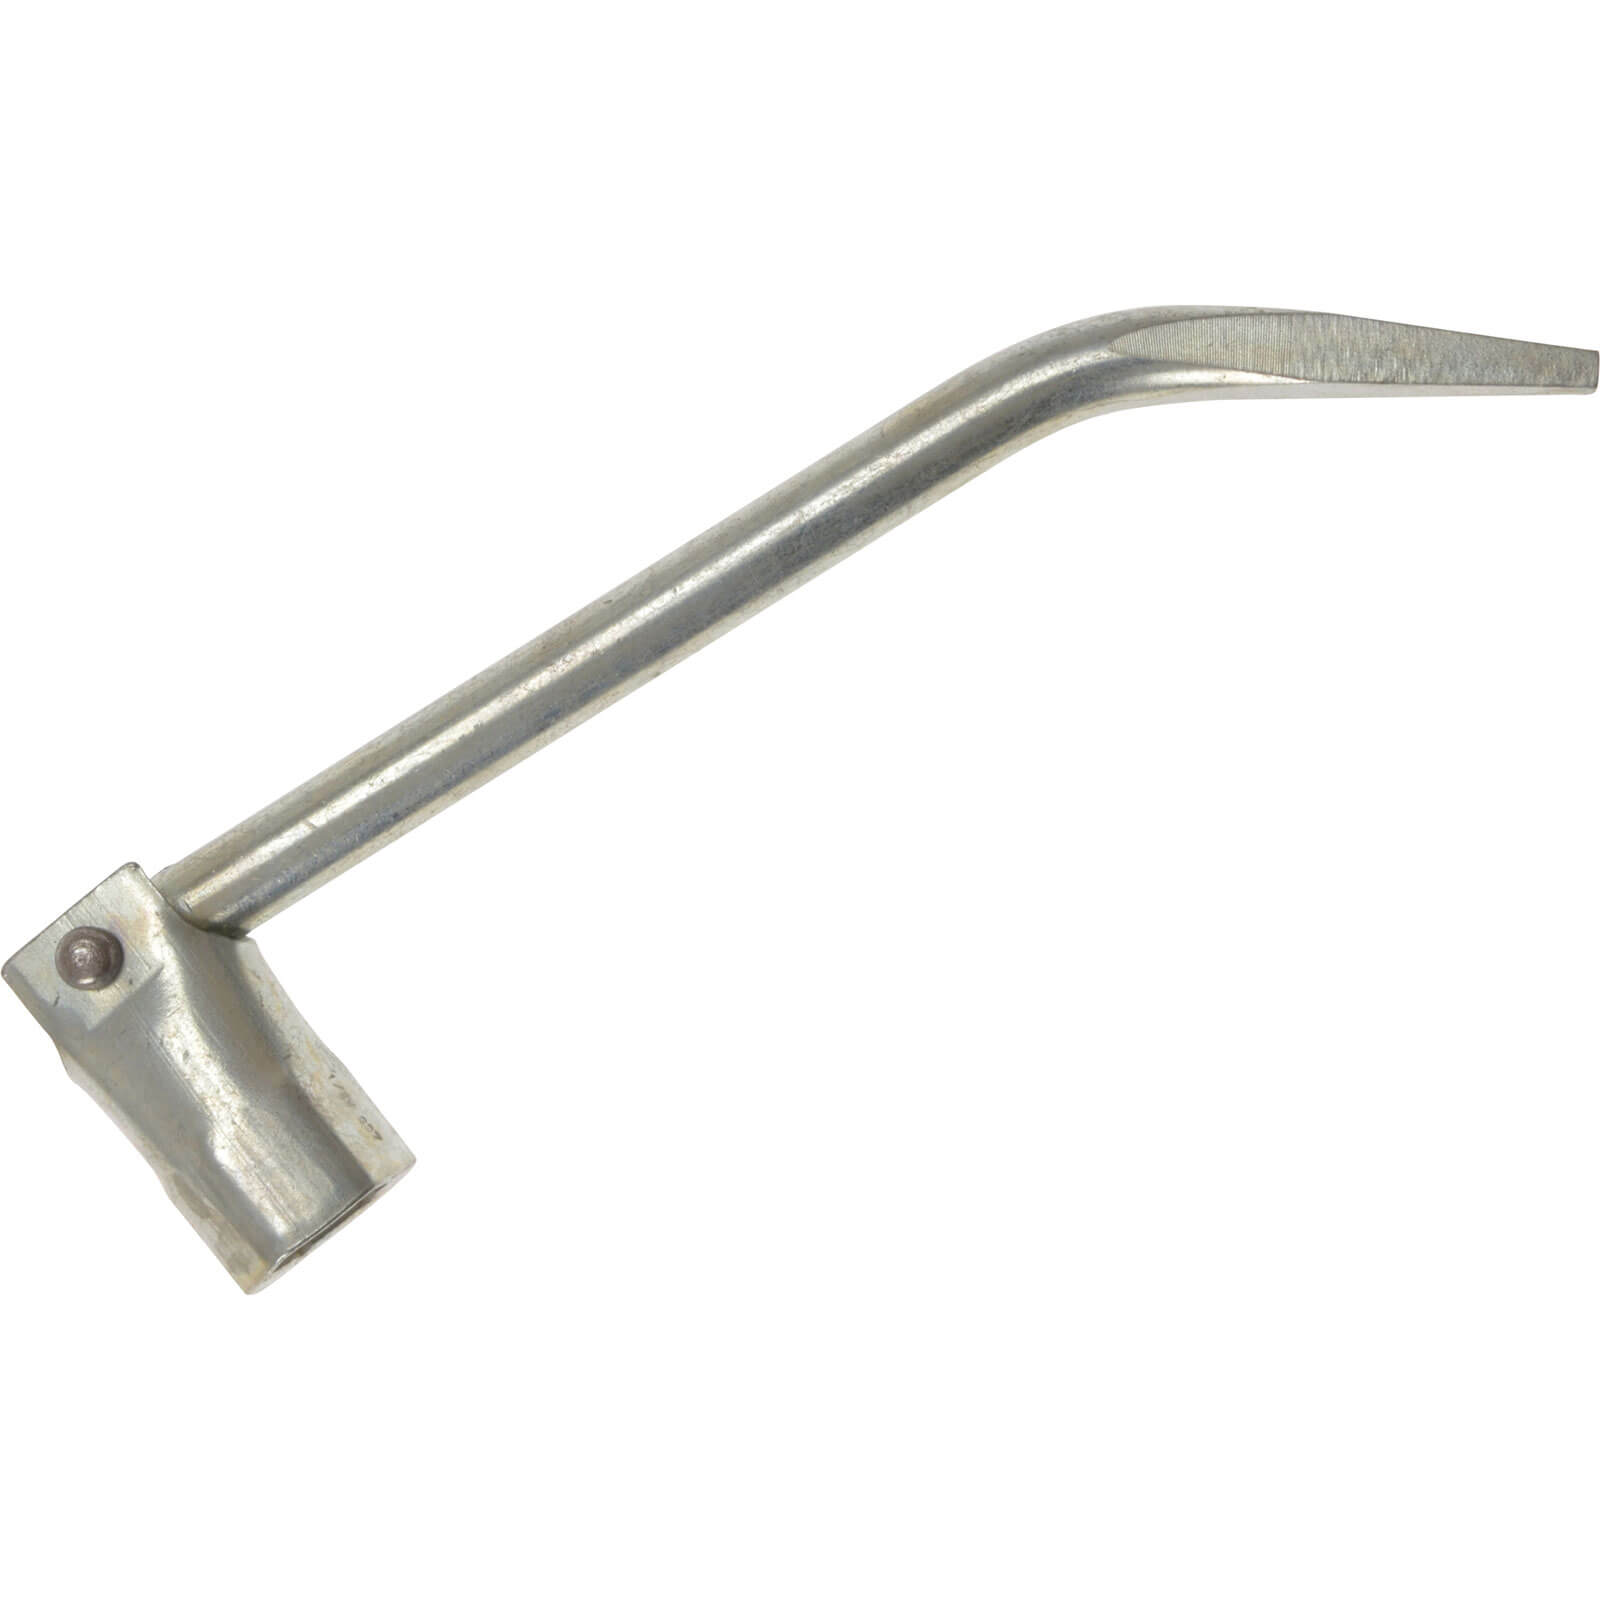 Image of Priory 320 Scaffold Podger Spanner Whitworth 7/16" Bent Pointed Steel Socket